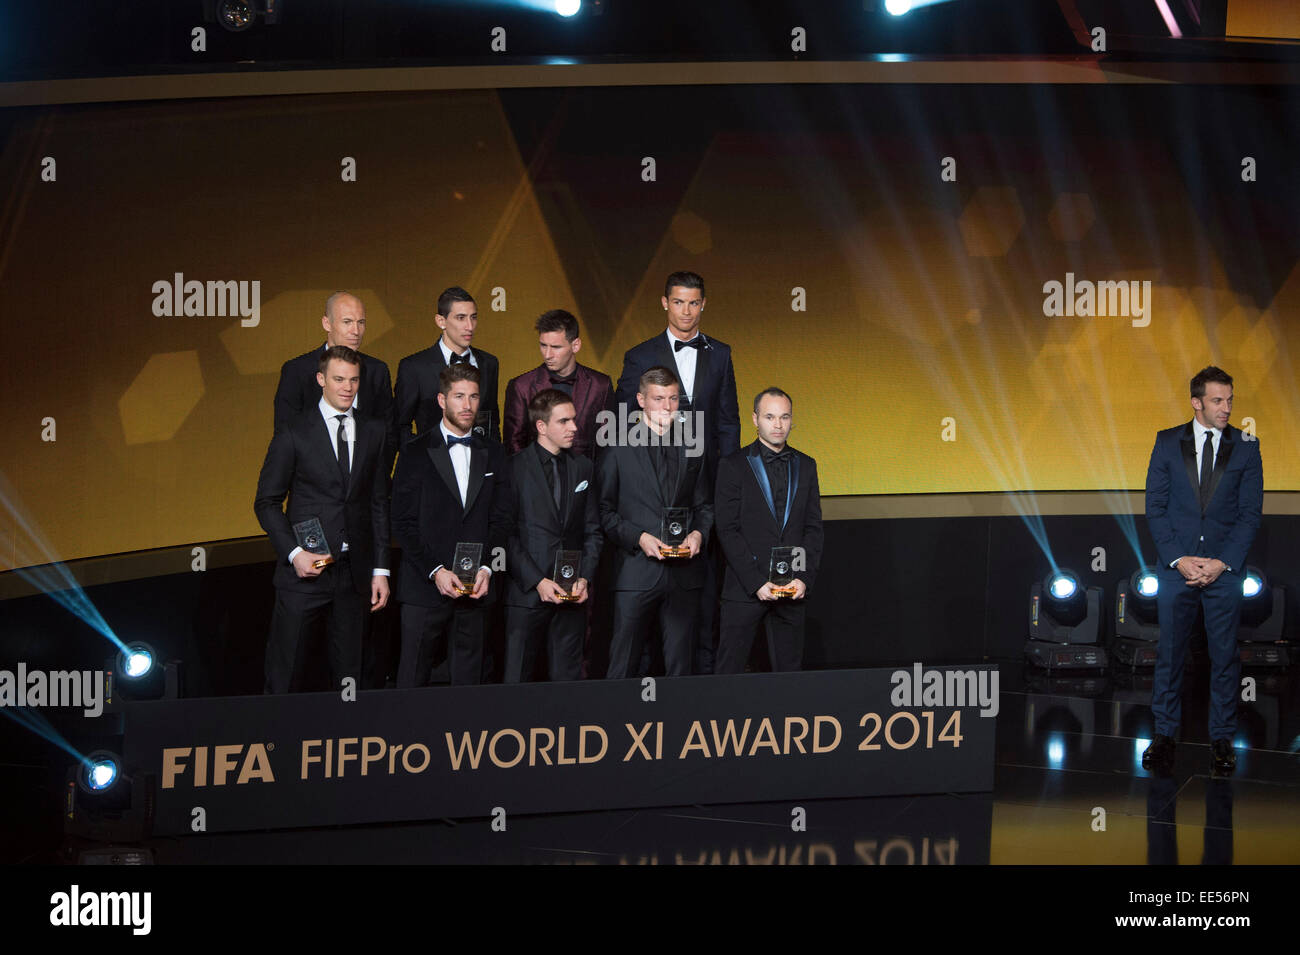 Zurich, Switzerland. 12th Jan, 2015. Winners of FIFA/FIFPro World XI 2014 Football/Soccer : Winners of the FIFA/FIFPro World XI 2014 (Top row - L to R) Arjen Robben, Angel Di Maria, Lionel Messi, Cristiano Ronaldo, (Bottom row - L to R) Manuel Neuer, Sergio Ramos, Philipp Lahm, Toni Kroos and Andres Iniesta pose with their trophies as Alessandro Del Piero looks on during the FIFA Ballon d'Or 2014 Gala at Kongresshaus in Zurich, Switzerland . © Maurizio Borsari/AFLO/Alamy Live News Stock Photo